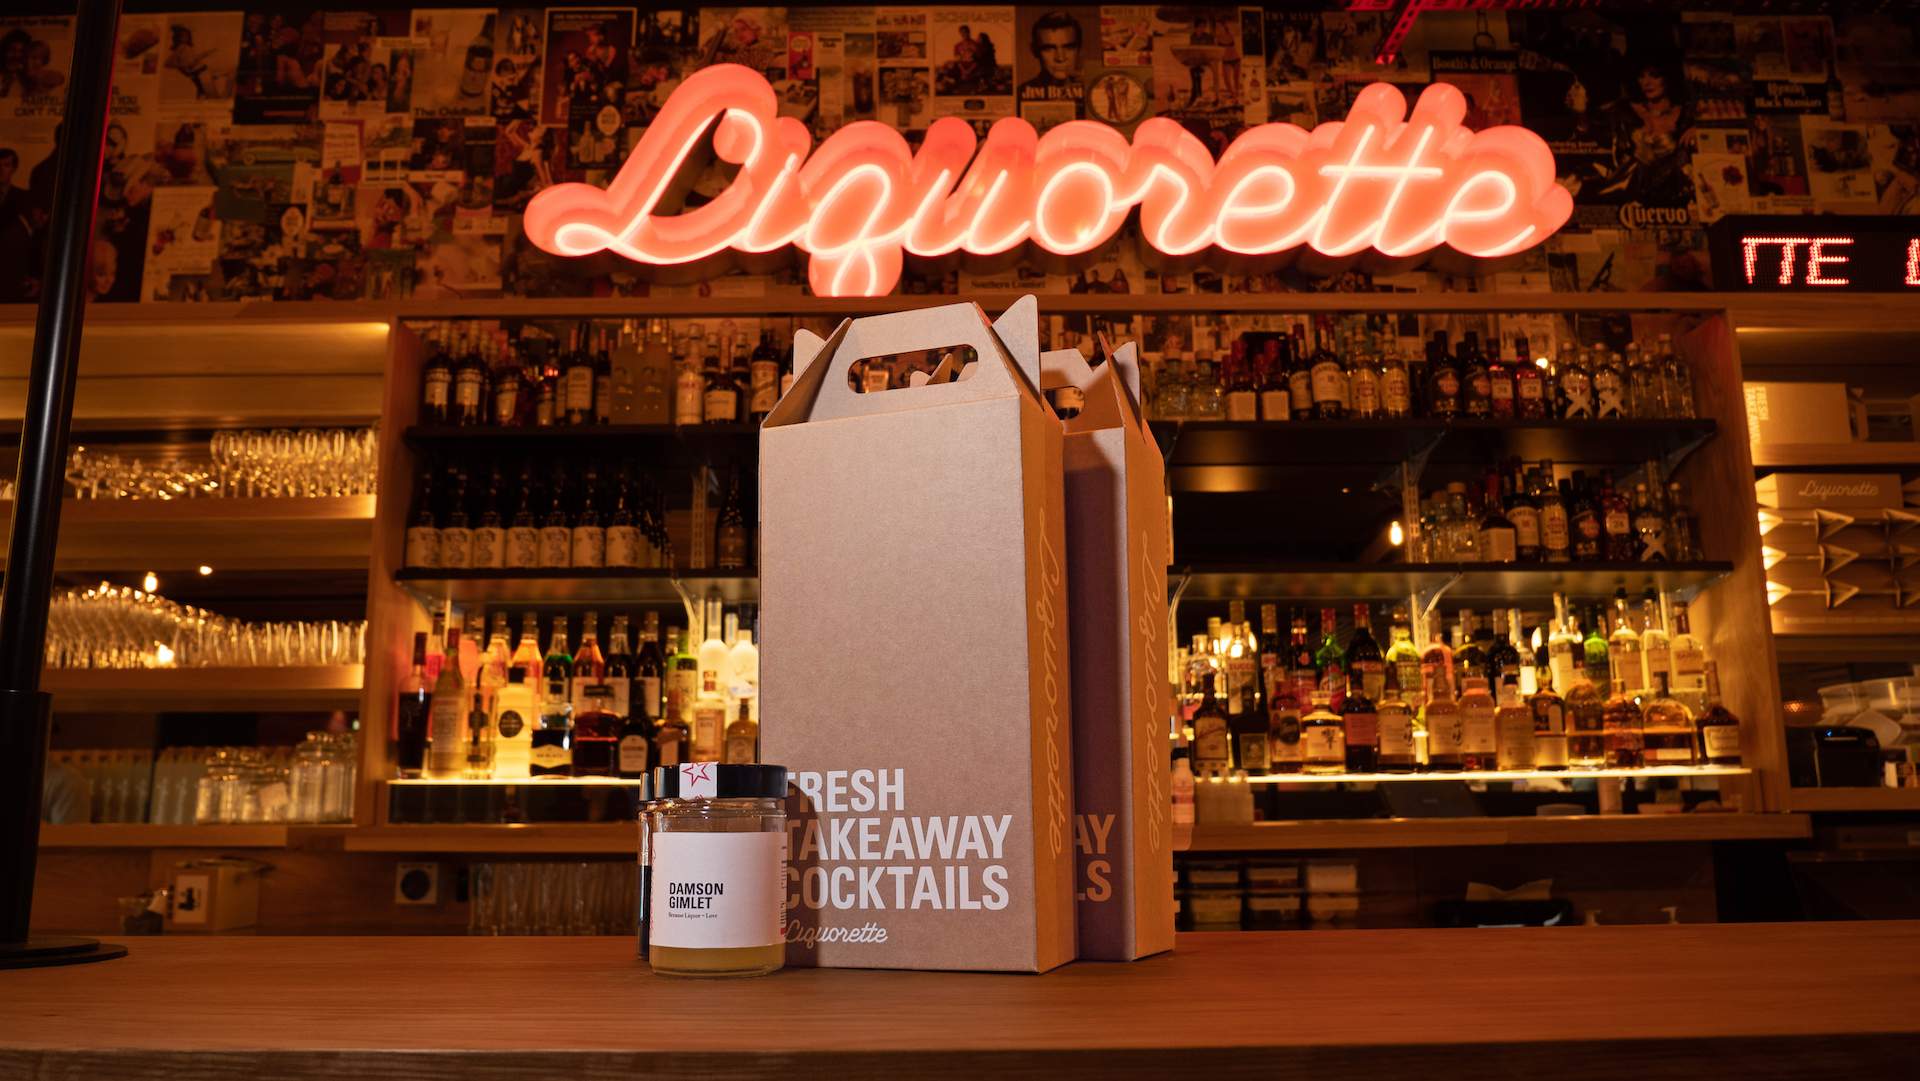 This New Inner City Drinks Counter Specialises in Takeaway Bottled Cocktails